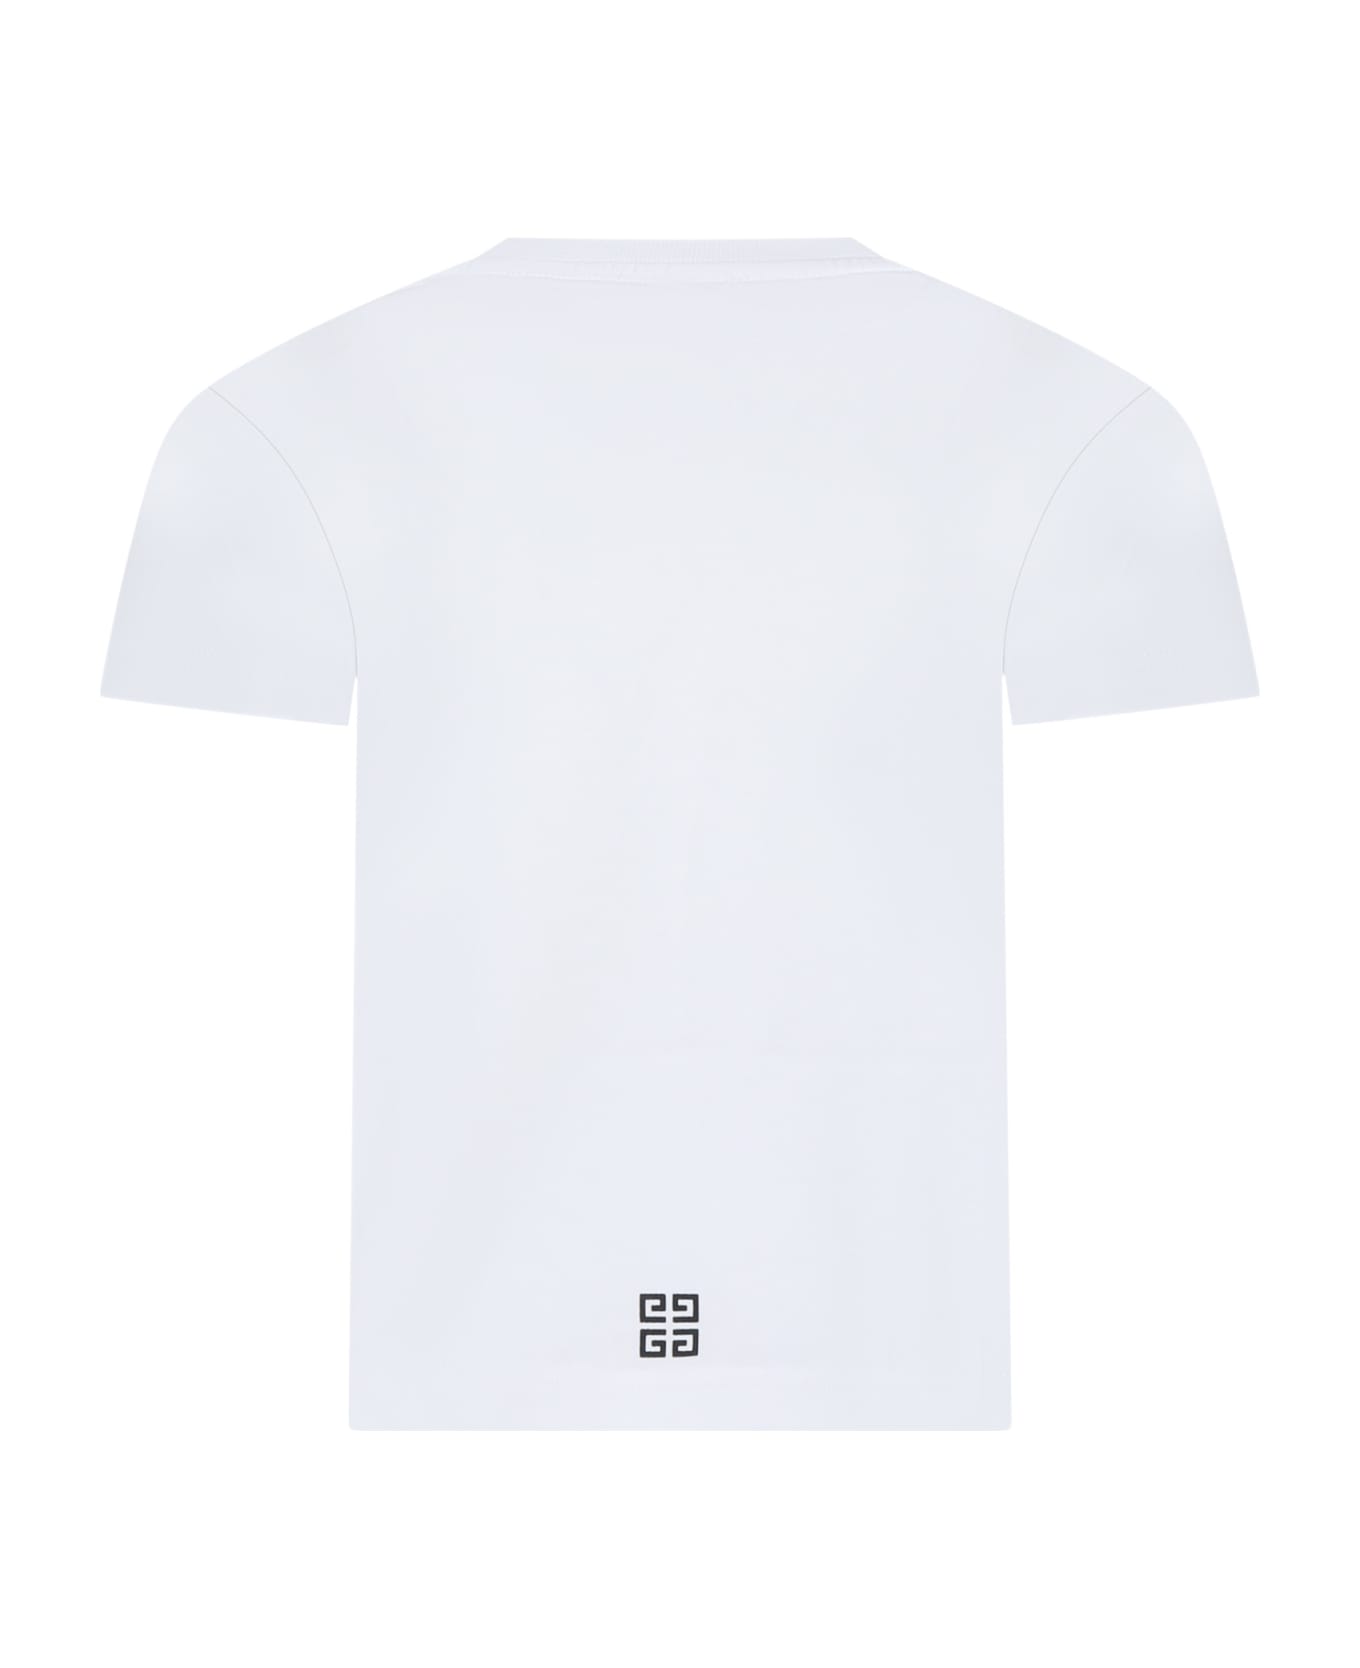 Givenchy White T-shirt For Kids With Logo - Bianco Tシャツ＆ポロシャツ